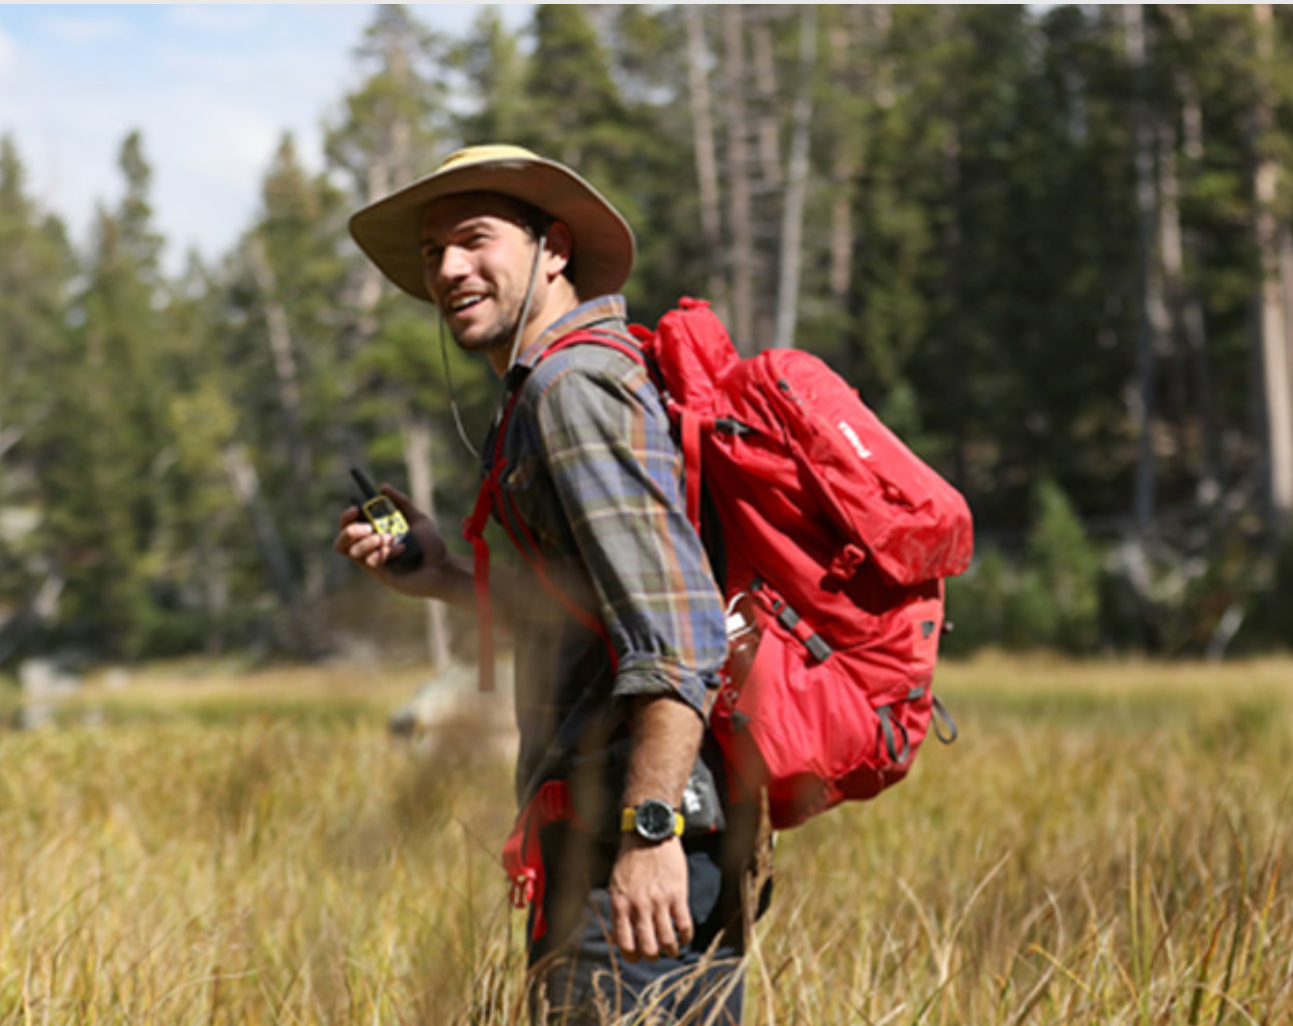 Man hiking with hat, backpack, and walkie talkie.